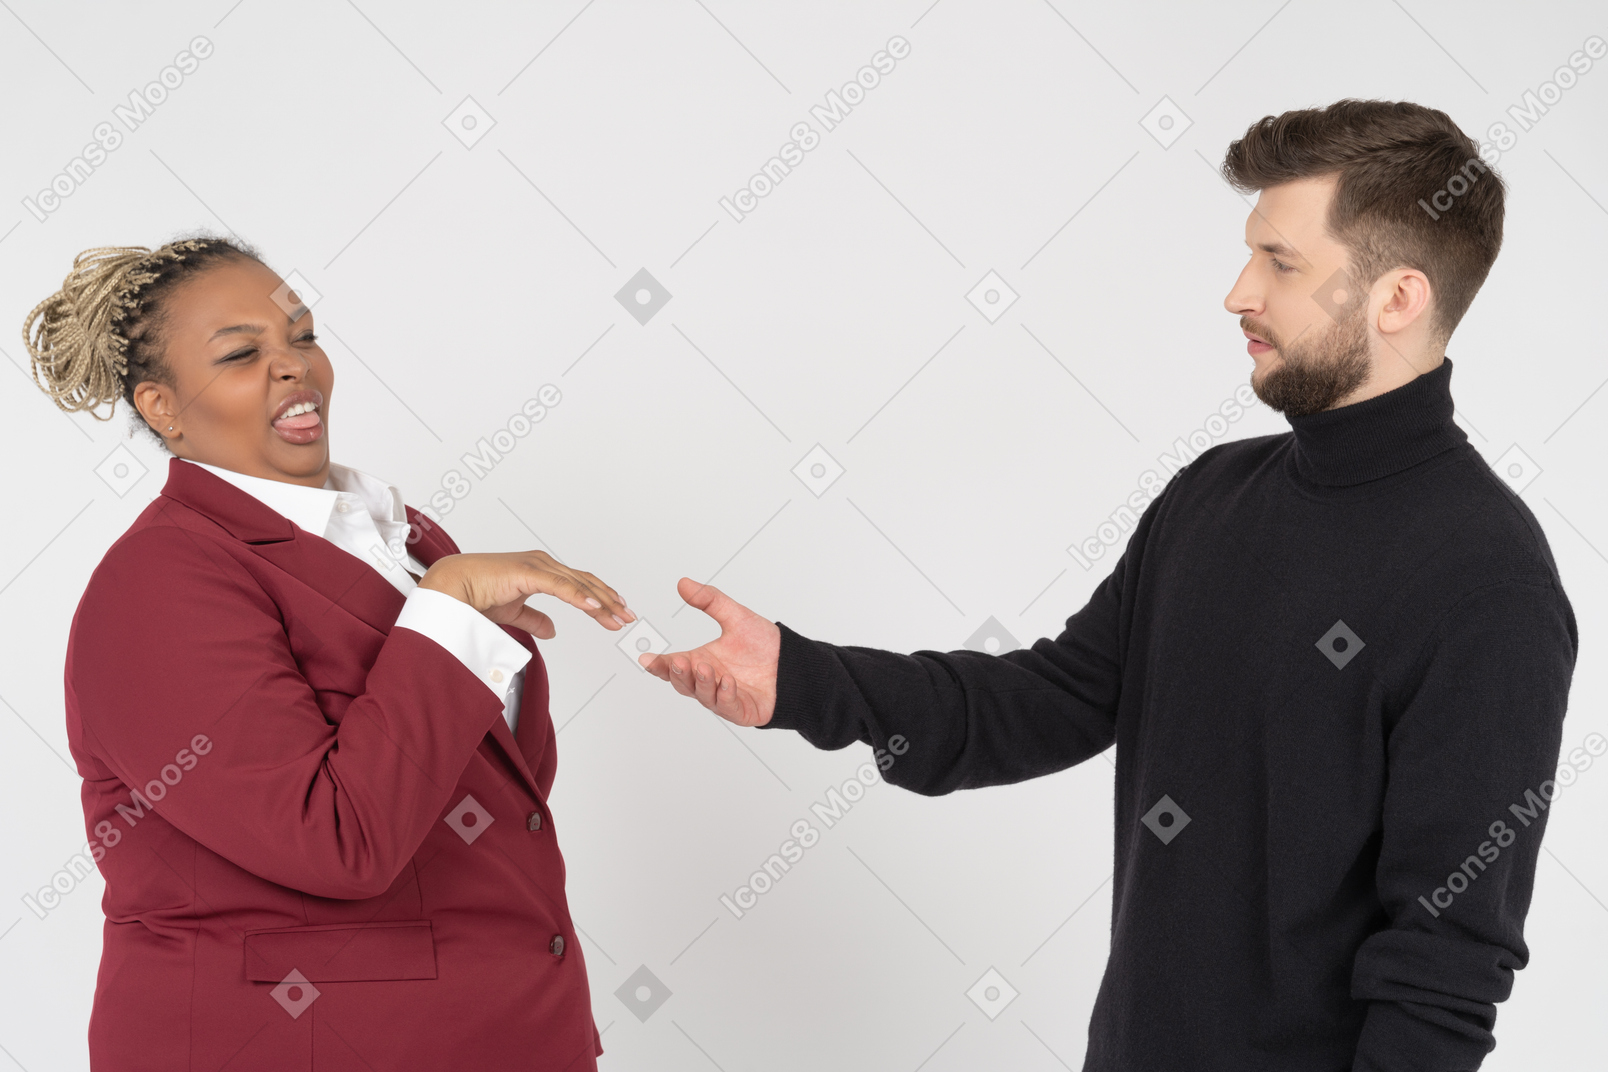 Woman hesitating about shaking hands